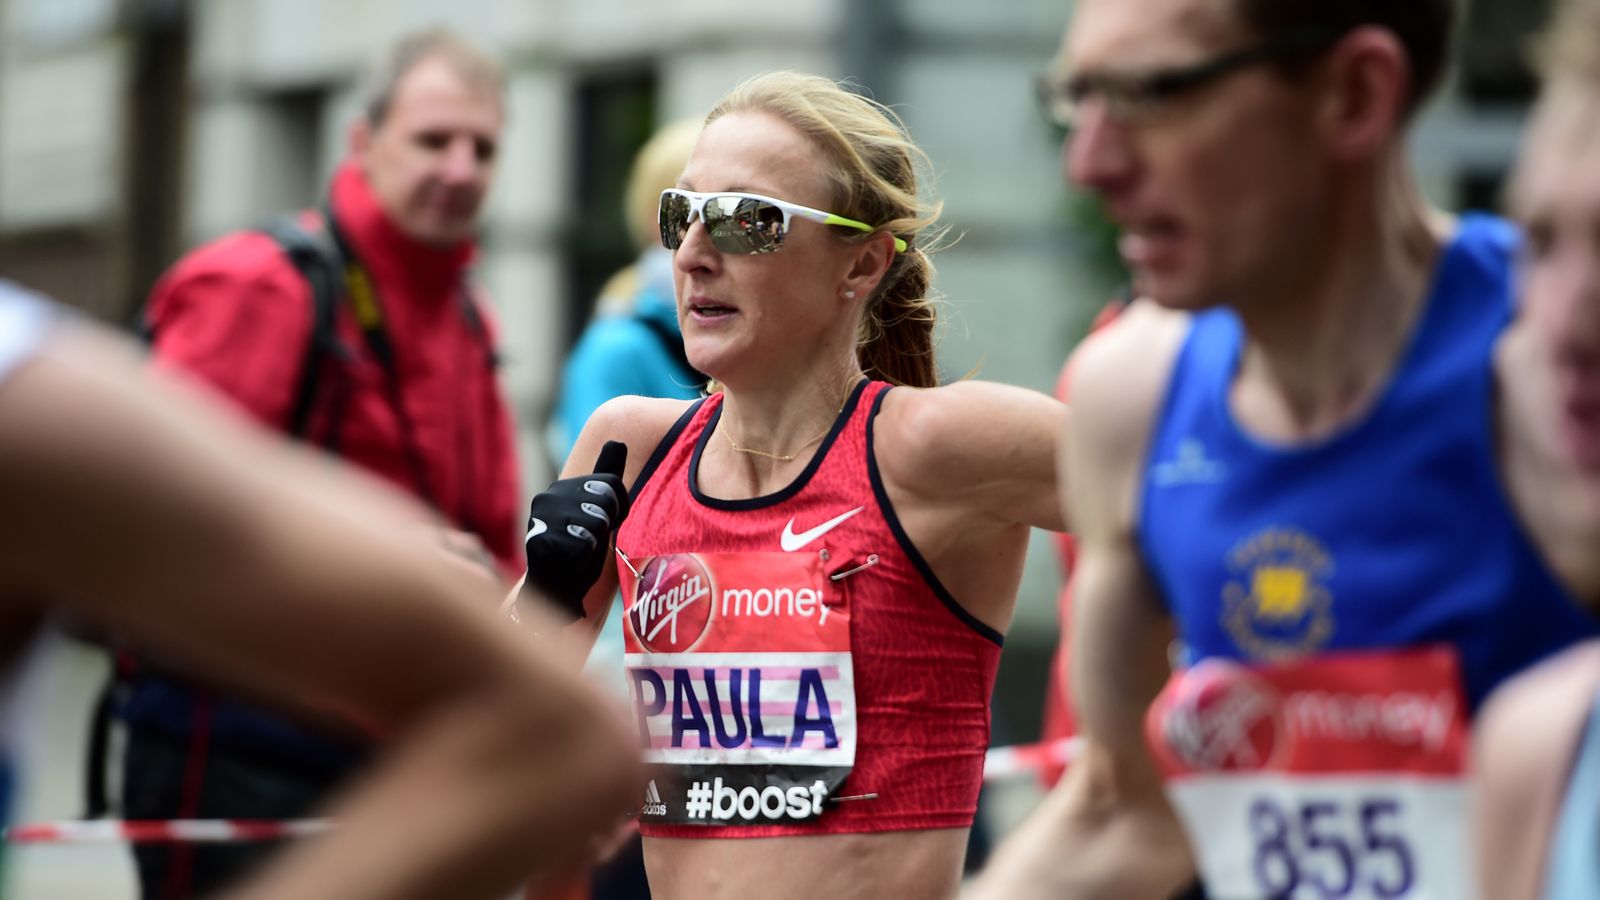 Paula Radcliffe ‘mortified’ after wishing convicted rapist the ‘best of luck’